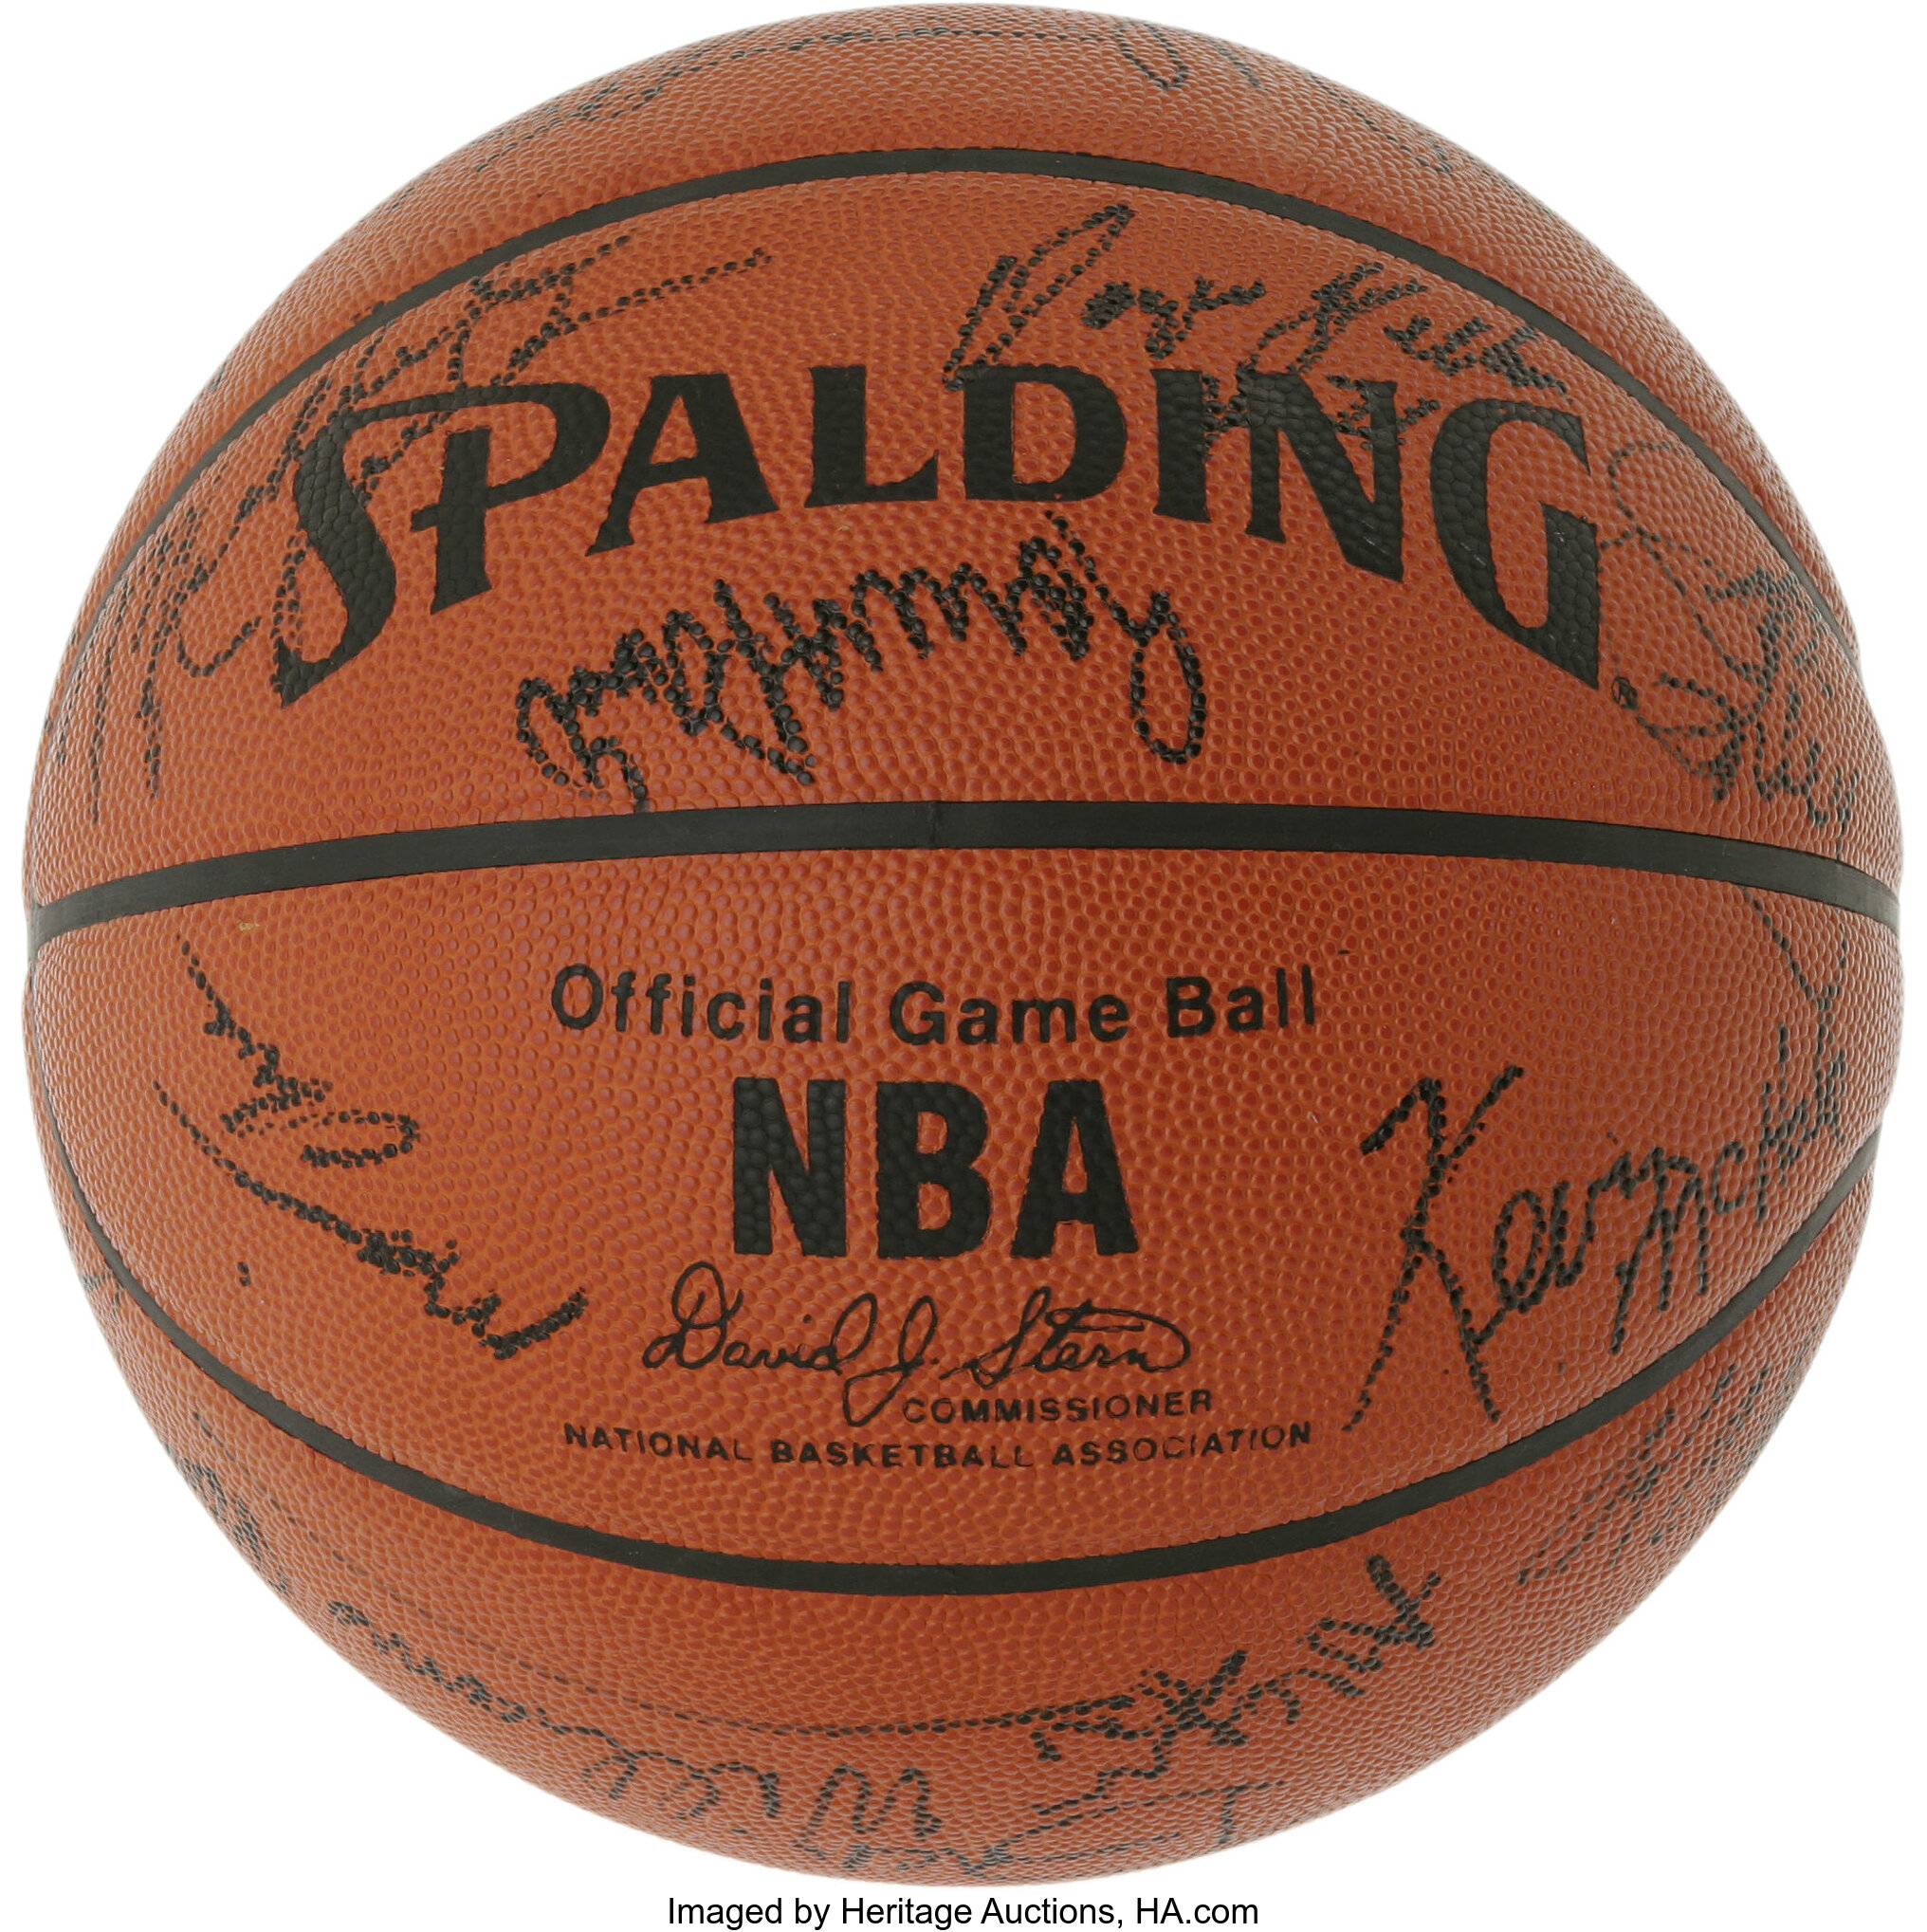 1986 NBA All-Star Game Multi-Signed Basketball. This immaculate